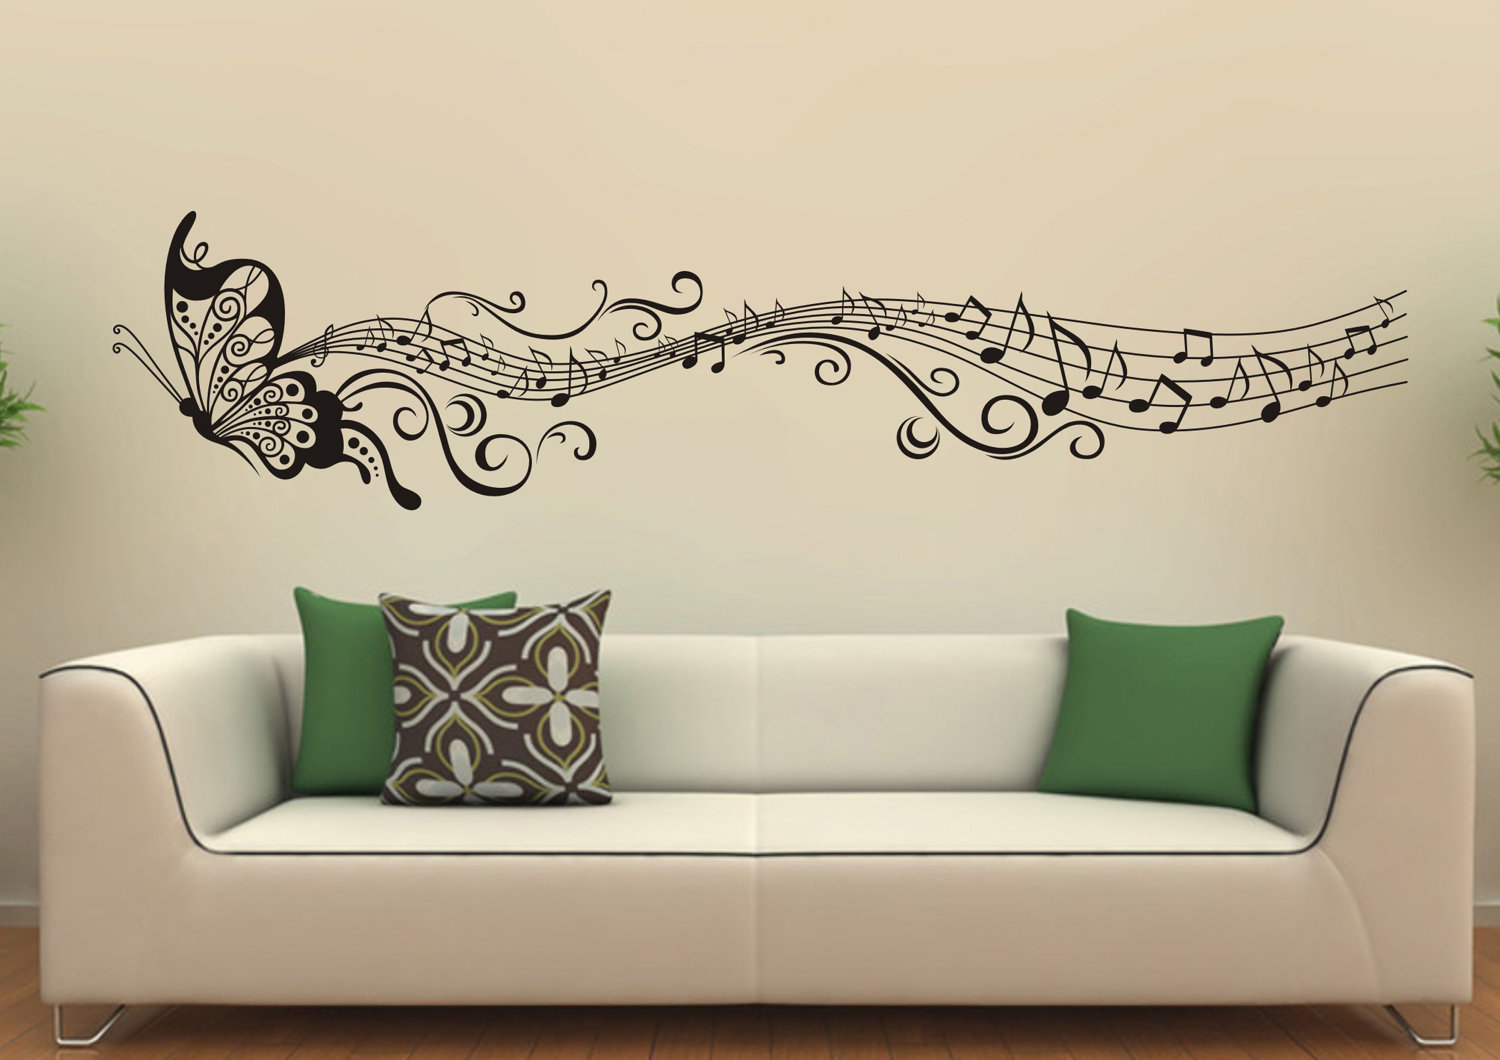 dazzling-decorations-easy-wall-art-ideas-for-decoration-inspirations-wall-decorations